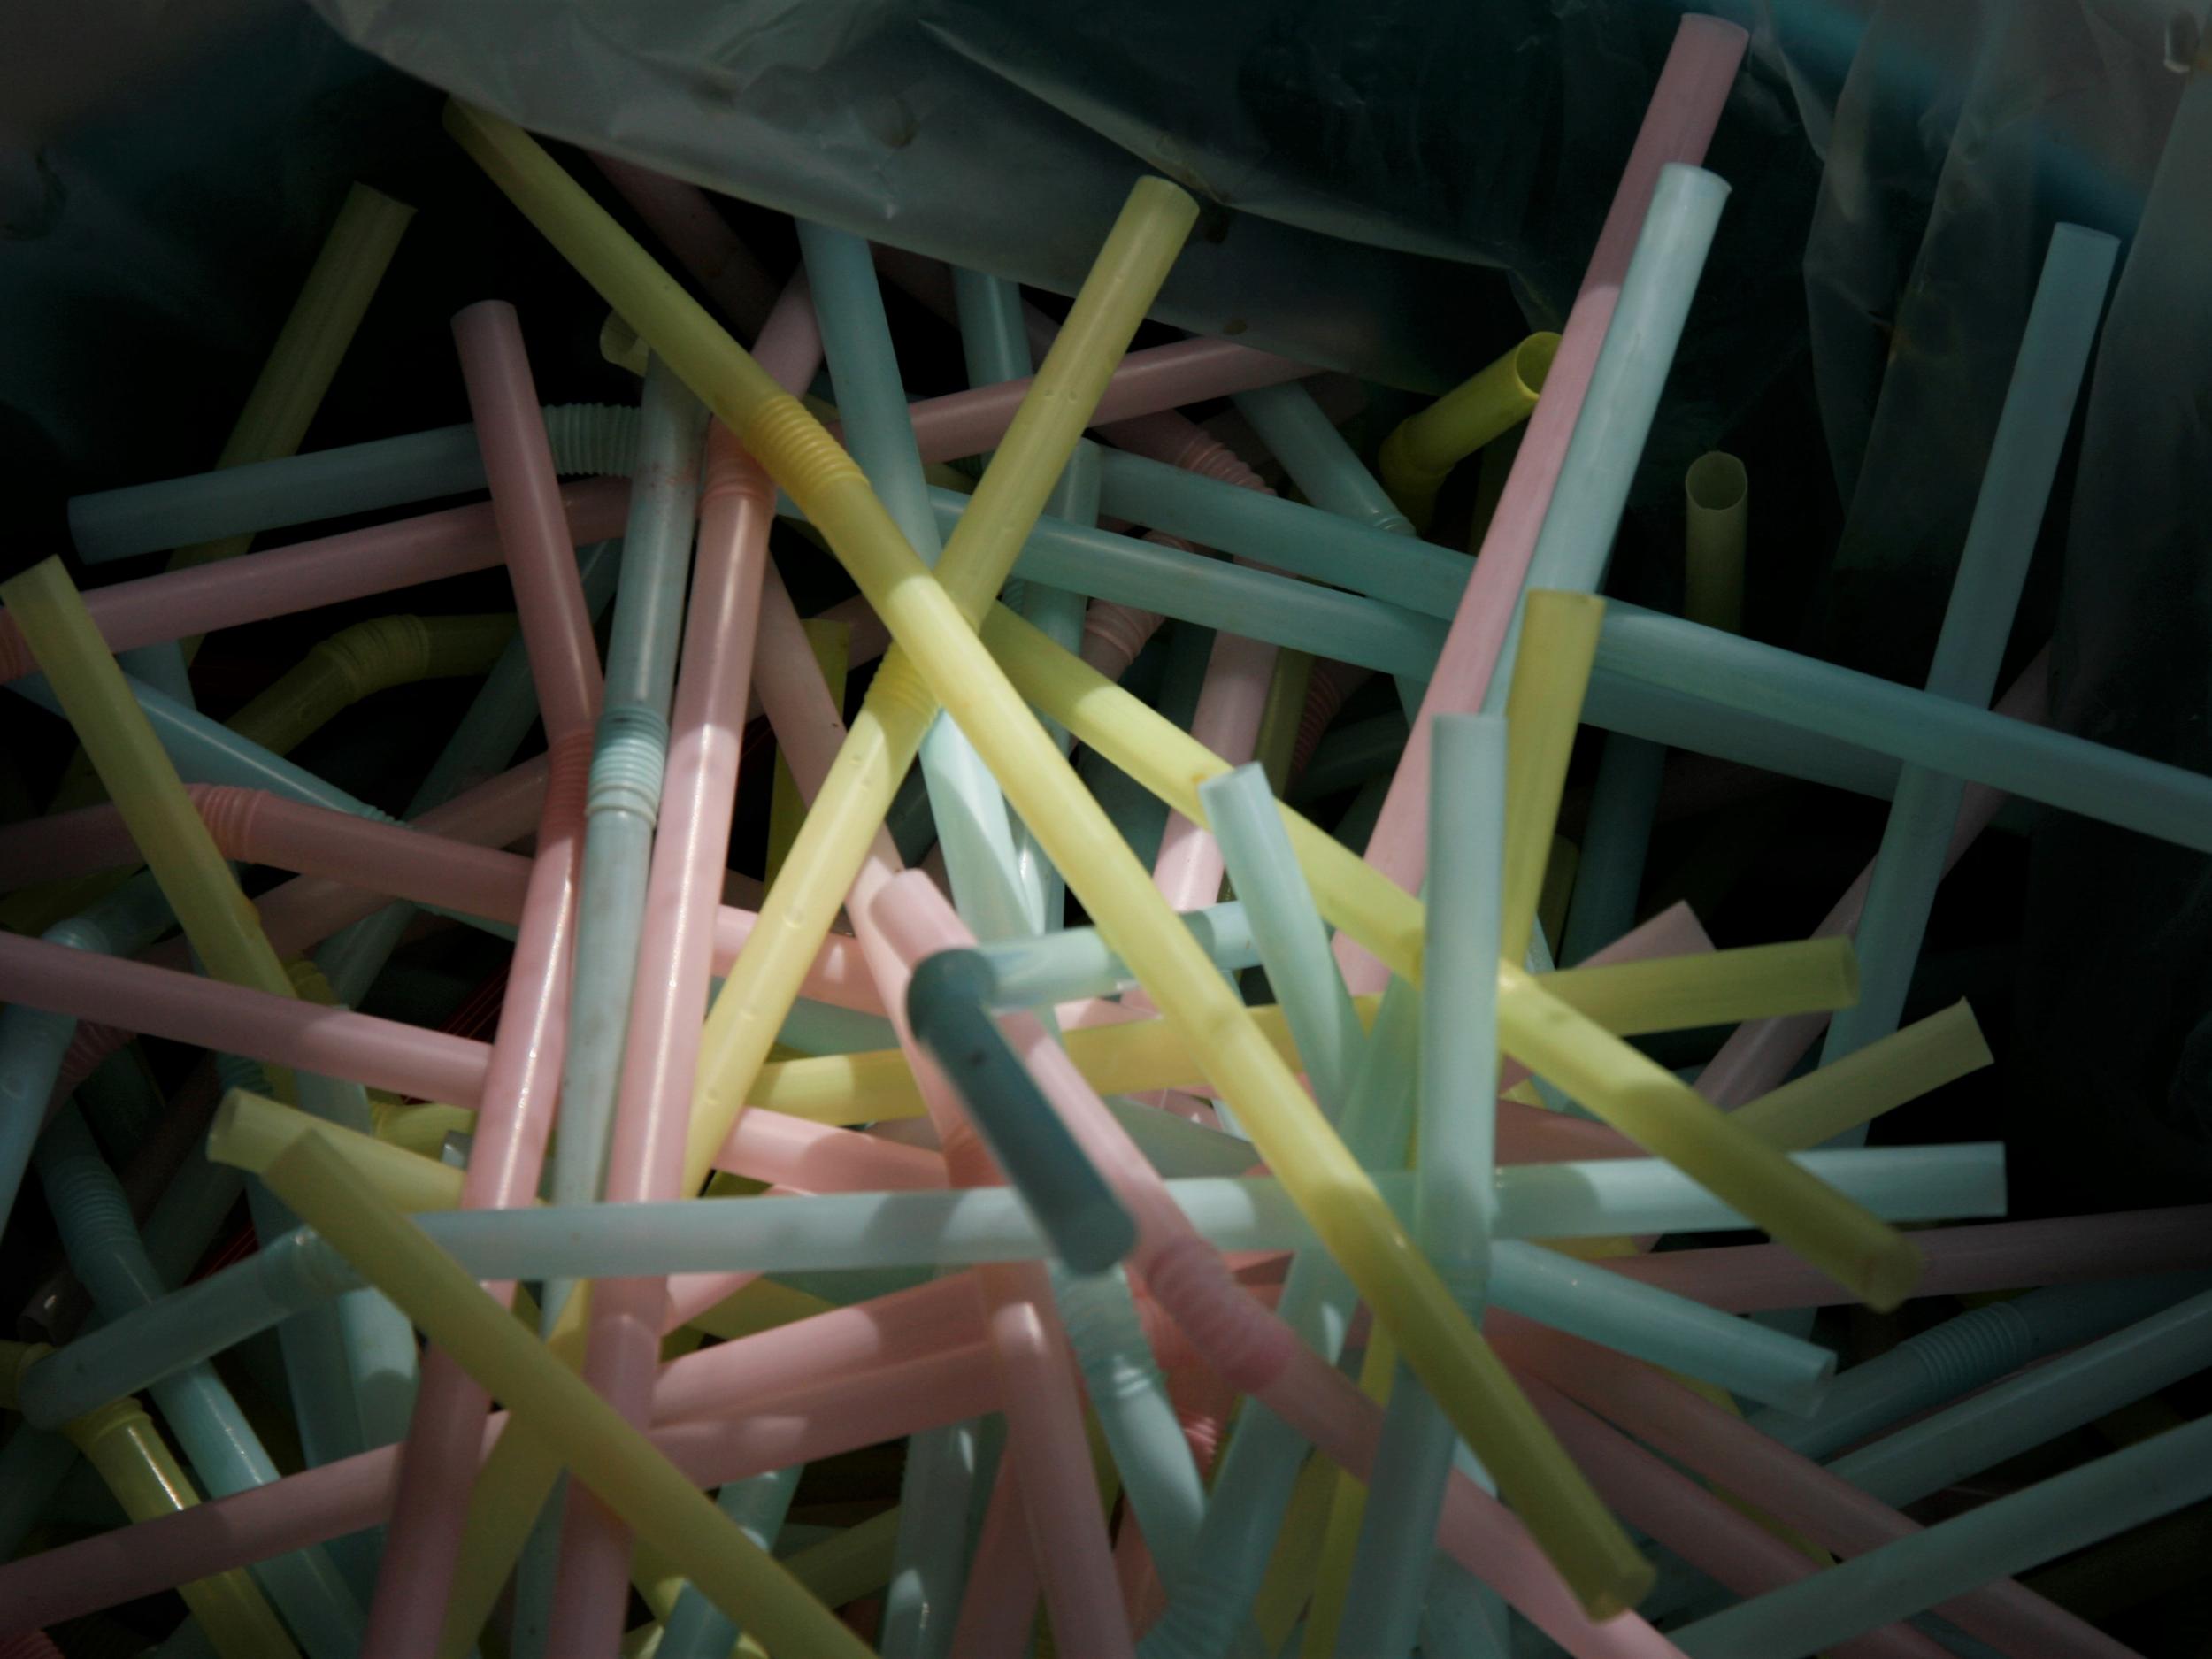 The Scottish Government is setting up an expert committee to consider ways of phasing out single-use plastics, including straws